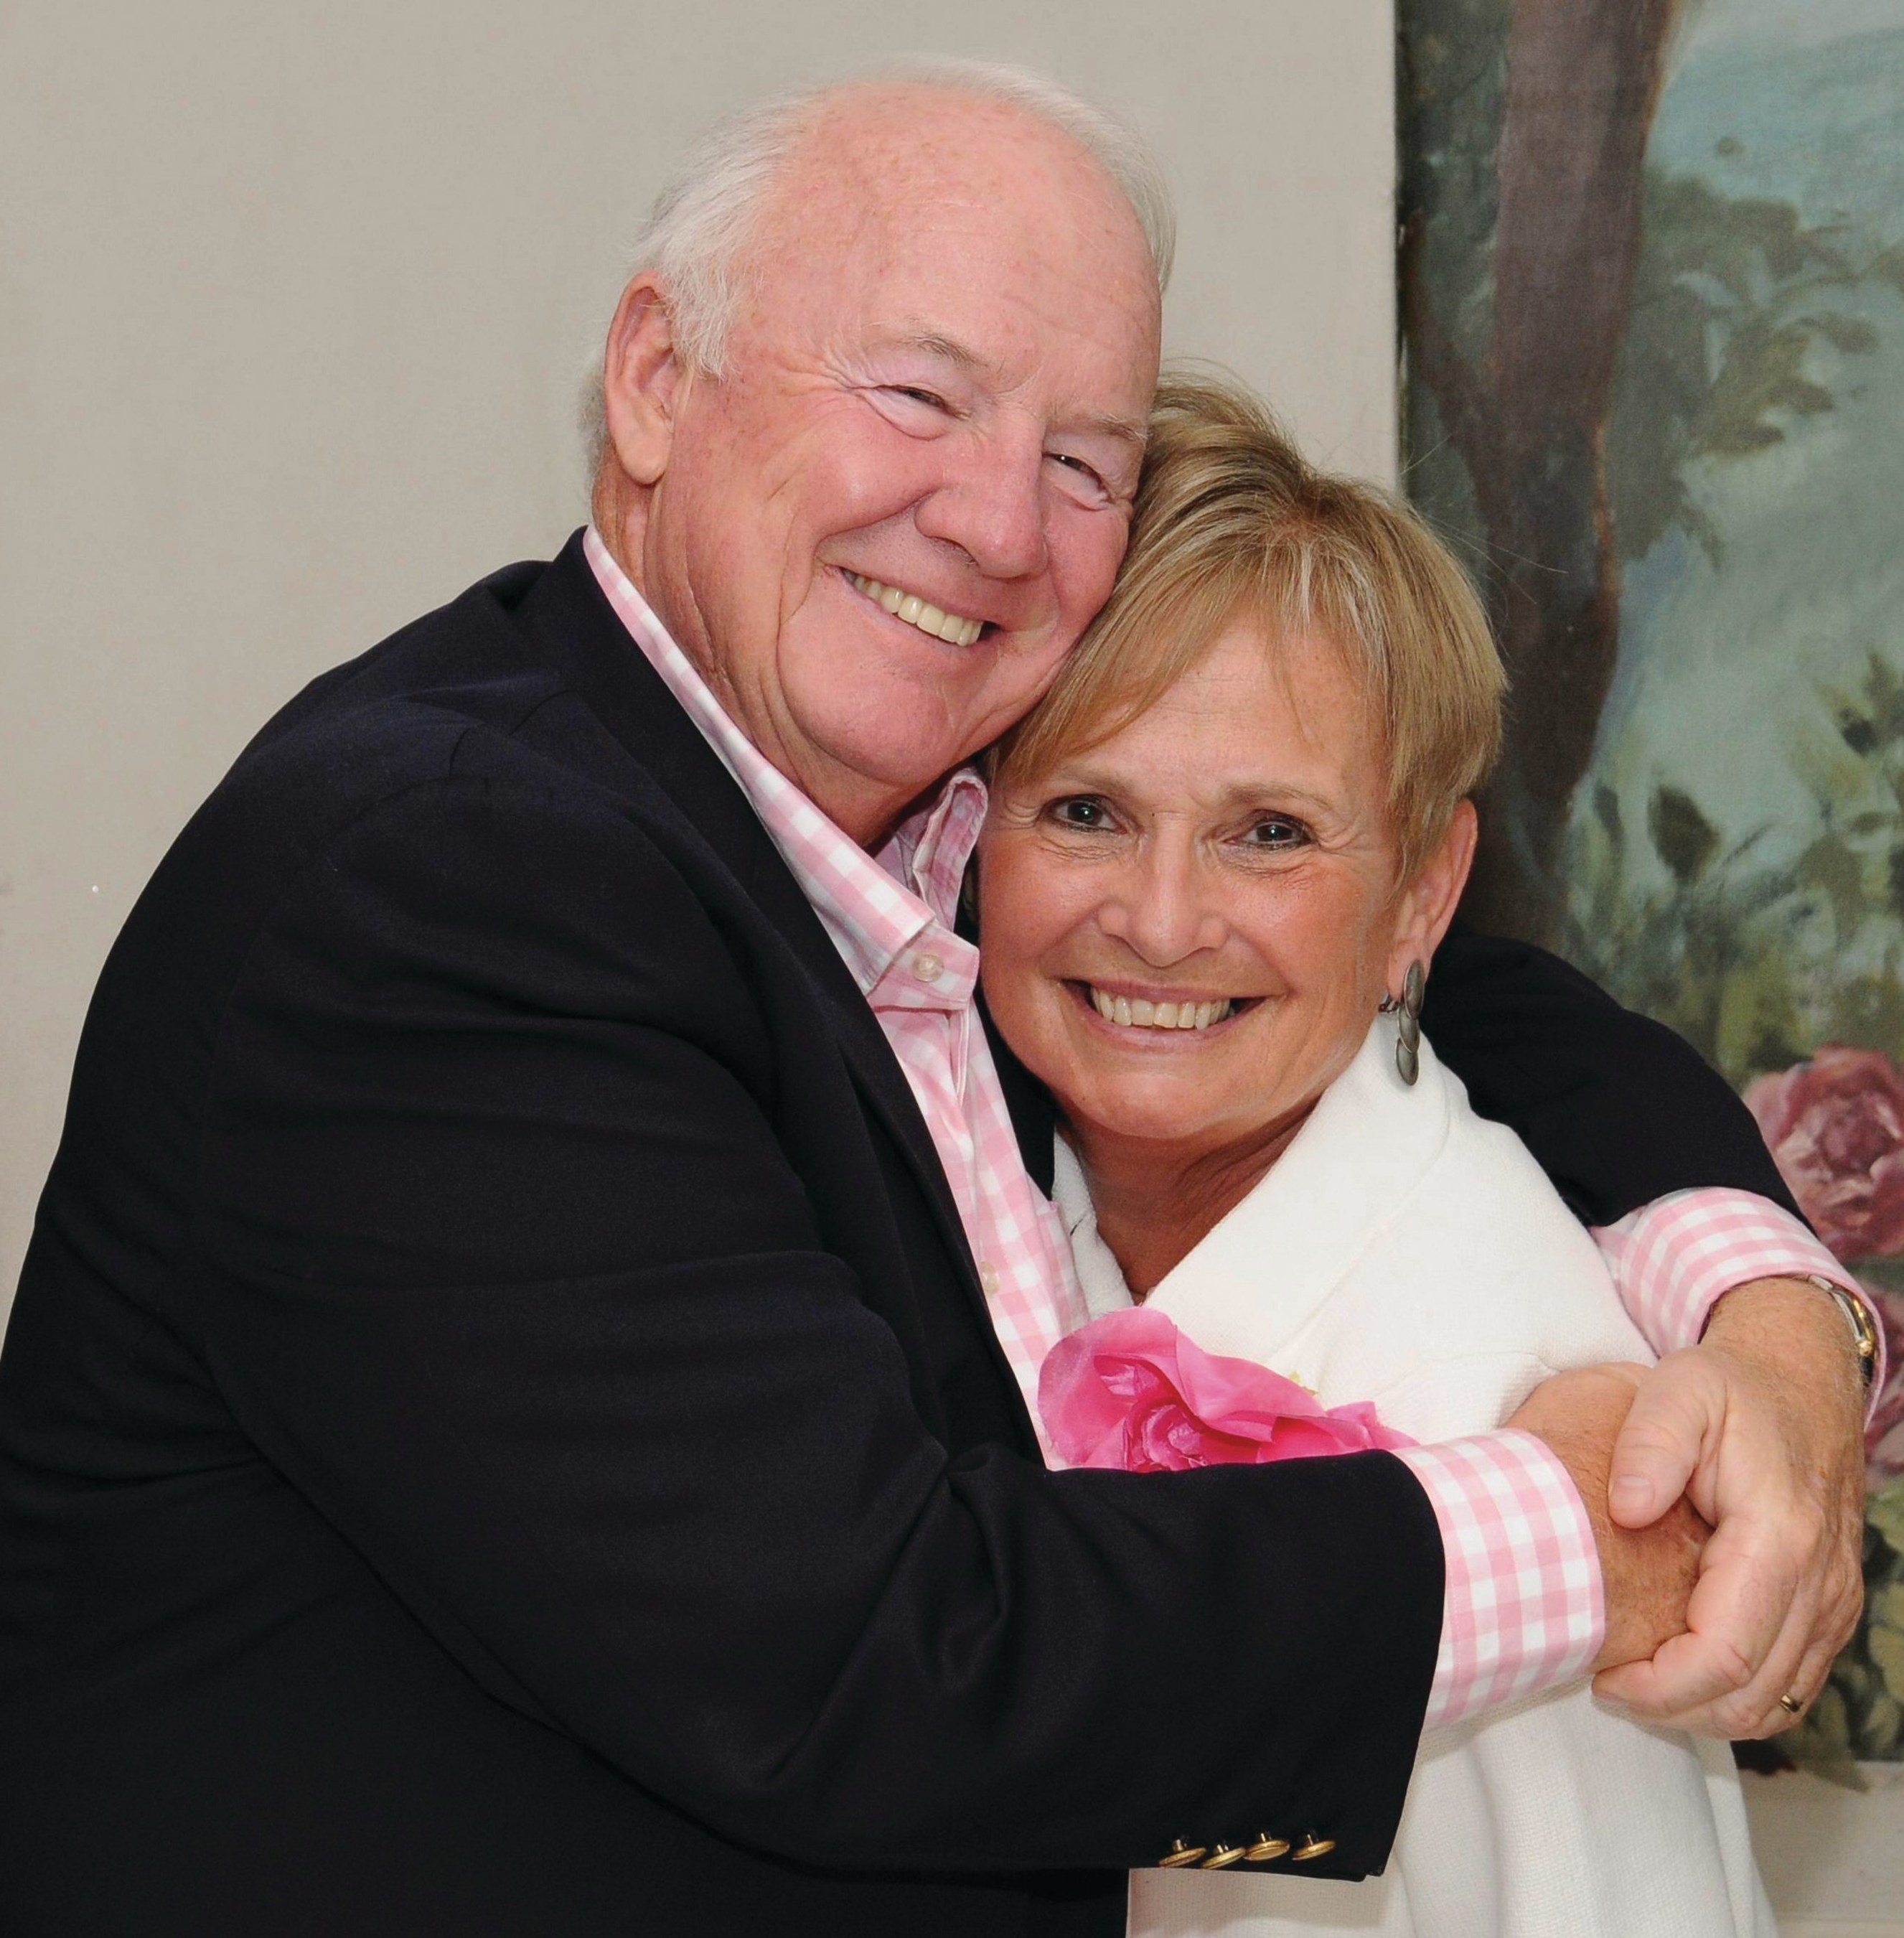 The Honorable Francis X. and Janet Kelly, Co-founders of Kelly & Associates Insurance Group, Inc.